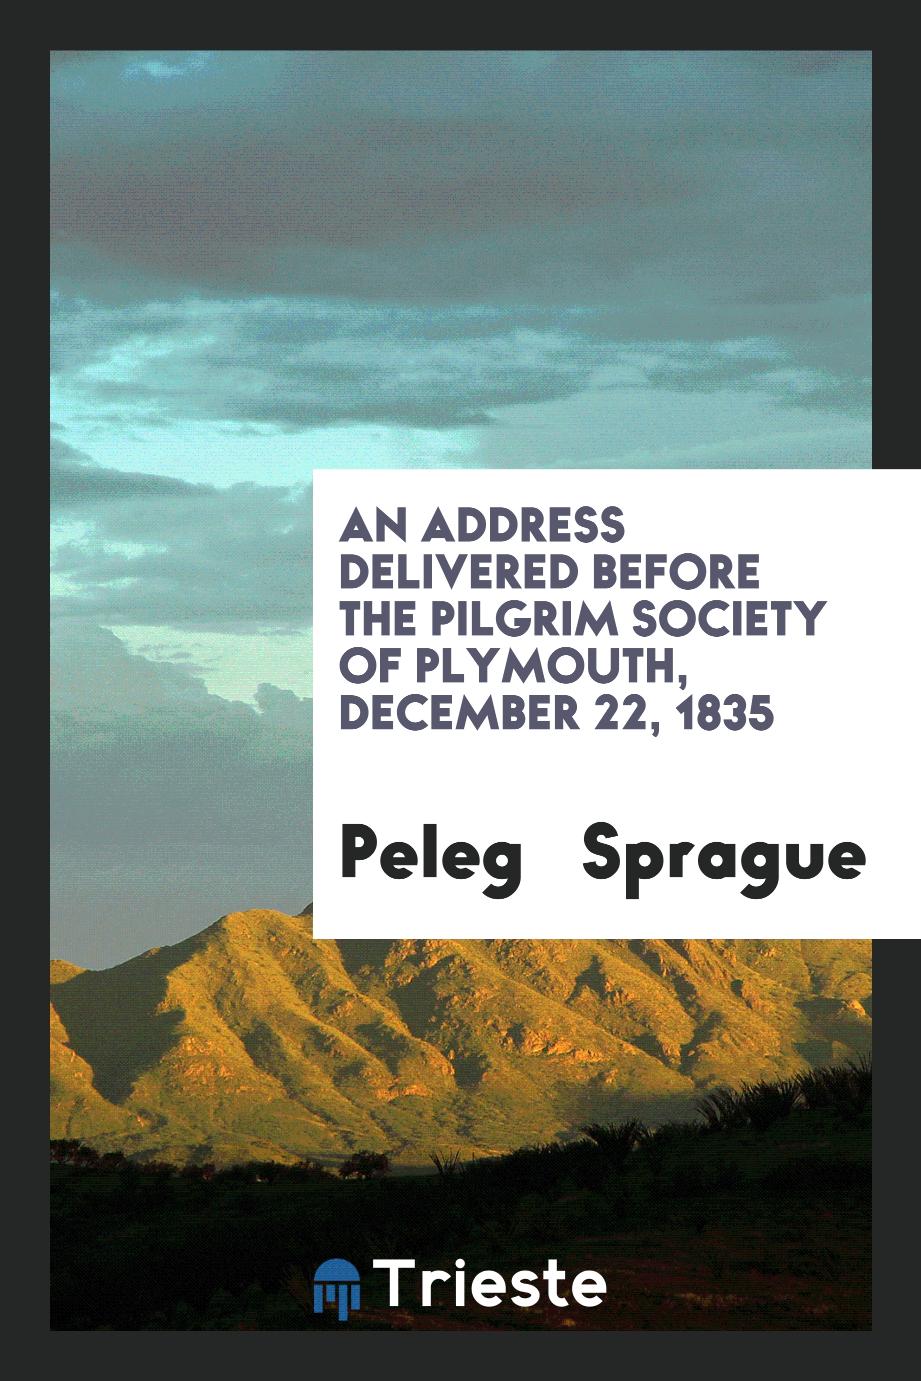 An Address Delivered Before the Pilgrim Society of Plymouth, December 22, 1835